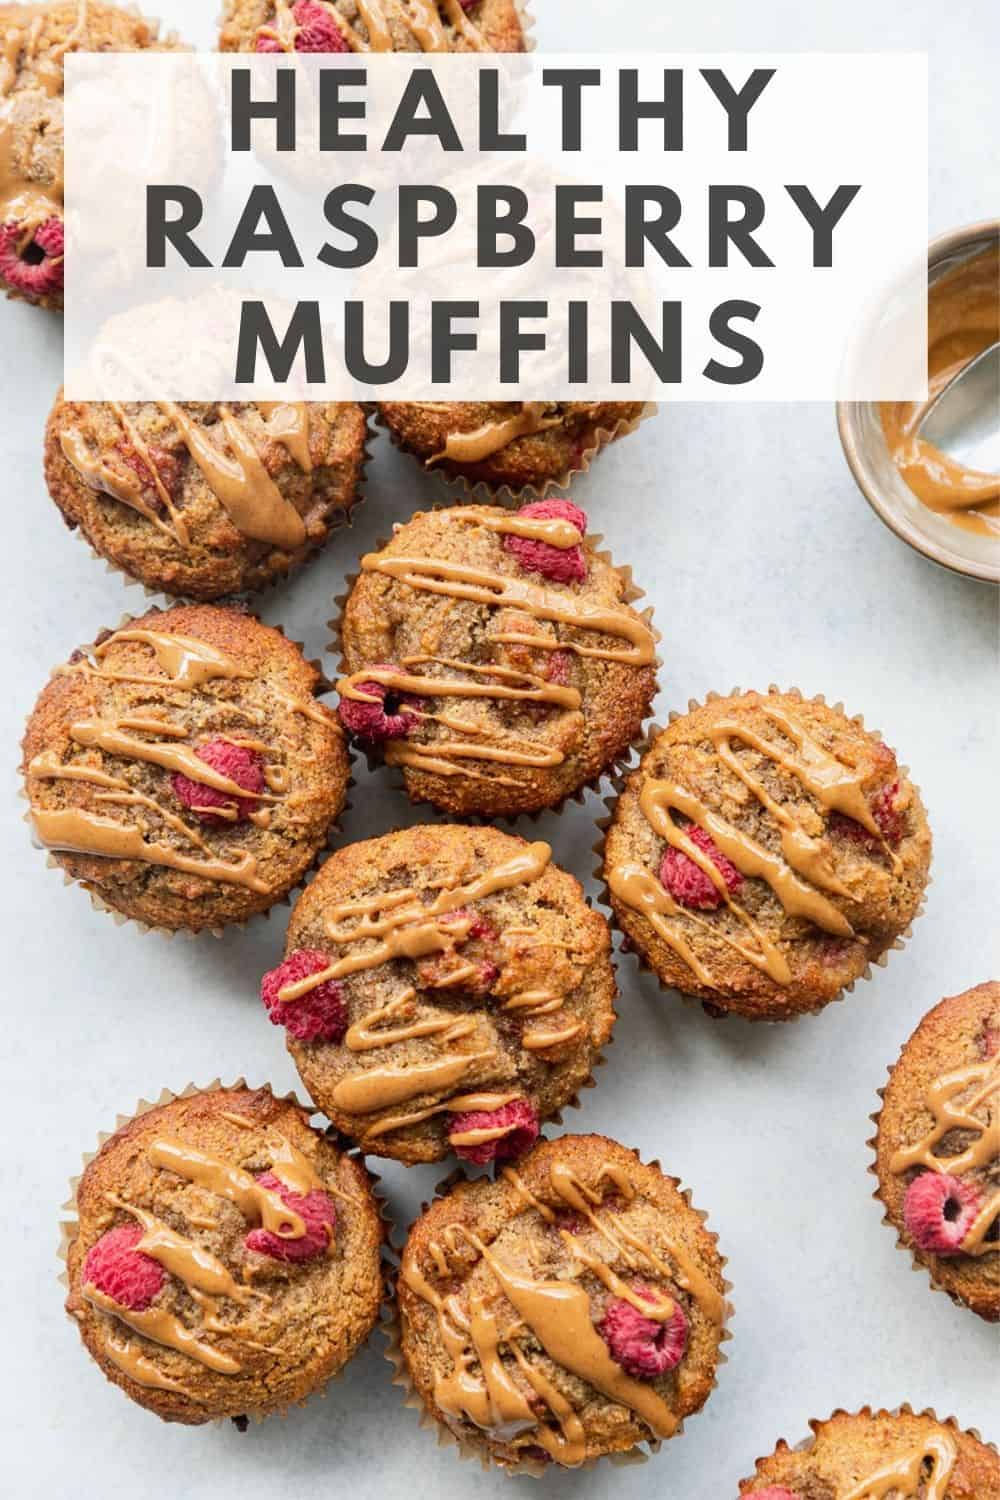 Healthy Peanut Butter + Raspberry Muffins - The Toasted Pine Nut